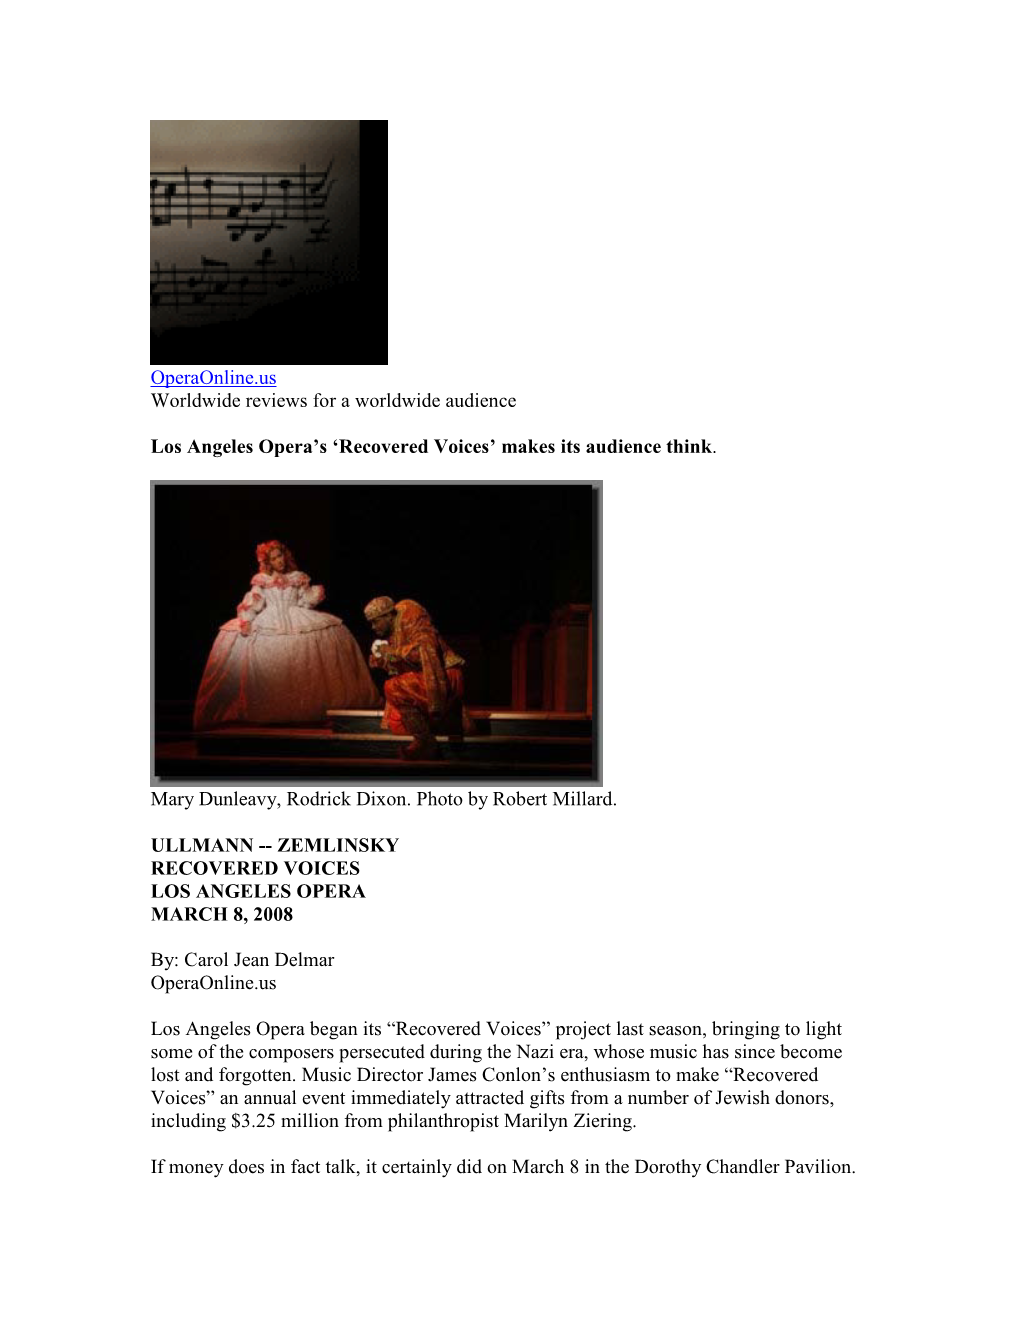 Operaonline.Us Worldwide Reviews for a Worldwide Audience Los Angeles Opera's 'Recovered Voices' Makes Its Audience Think